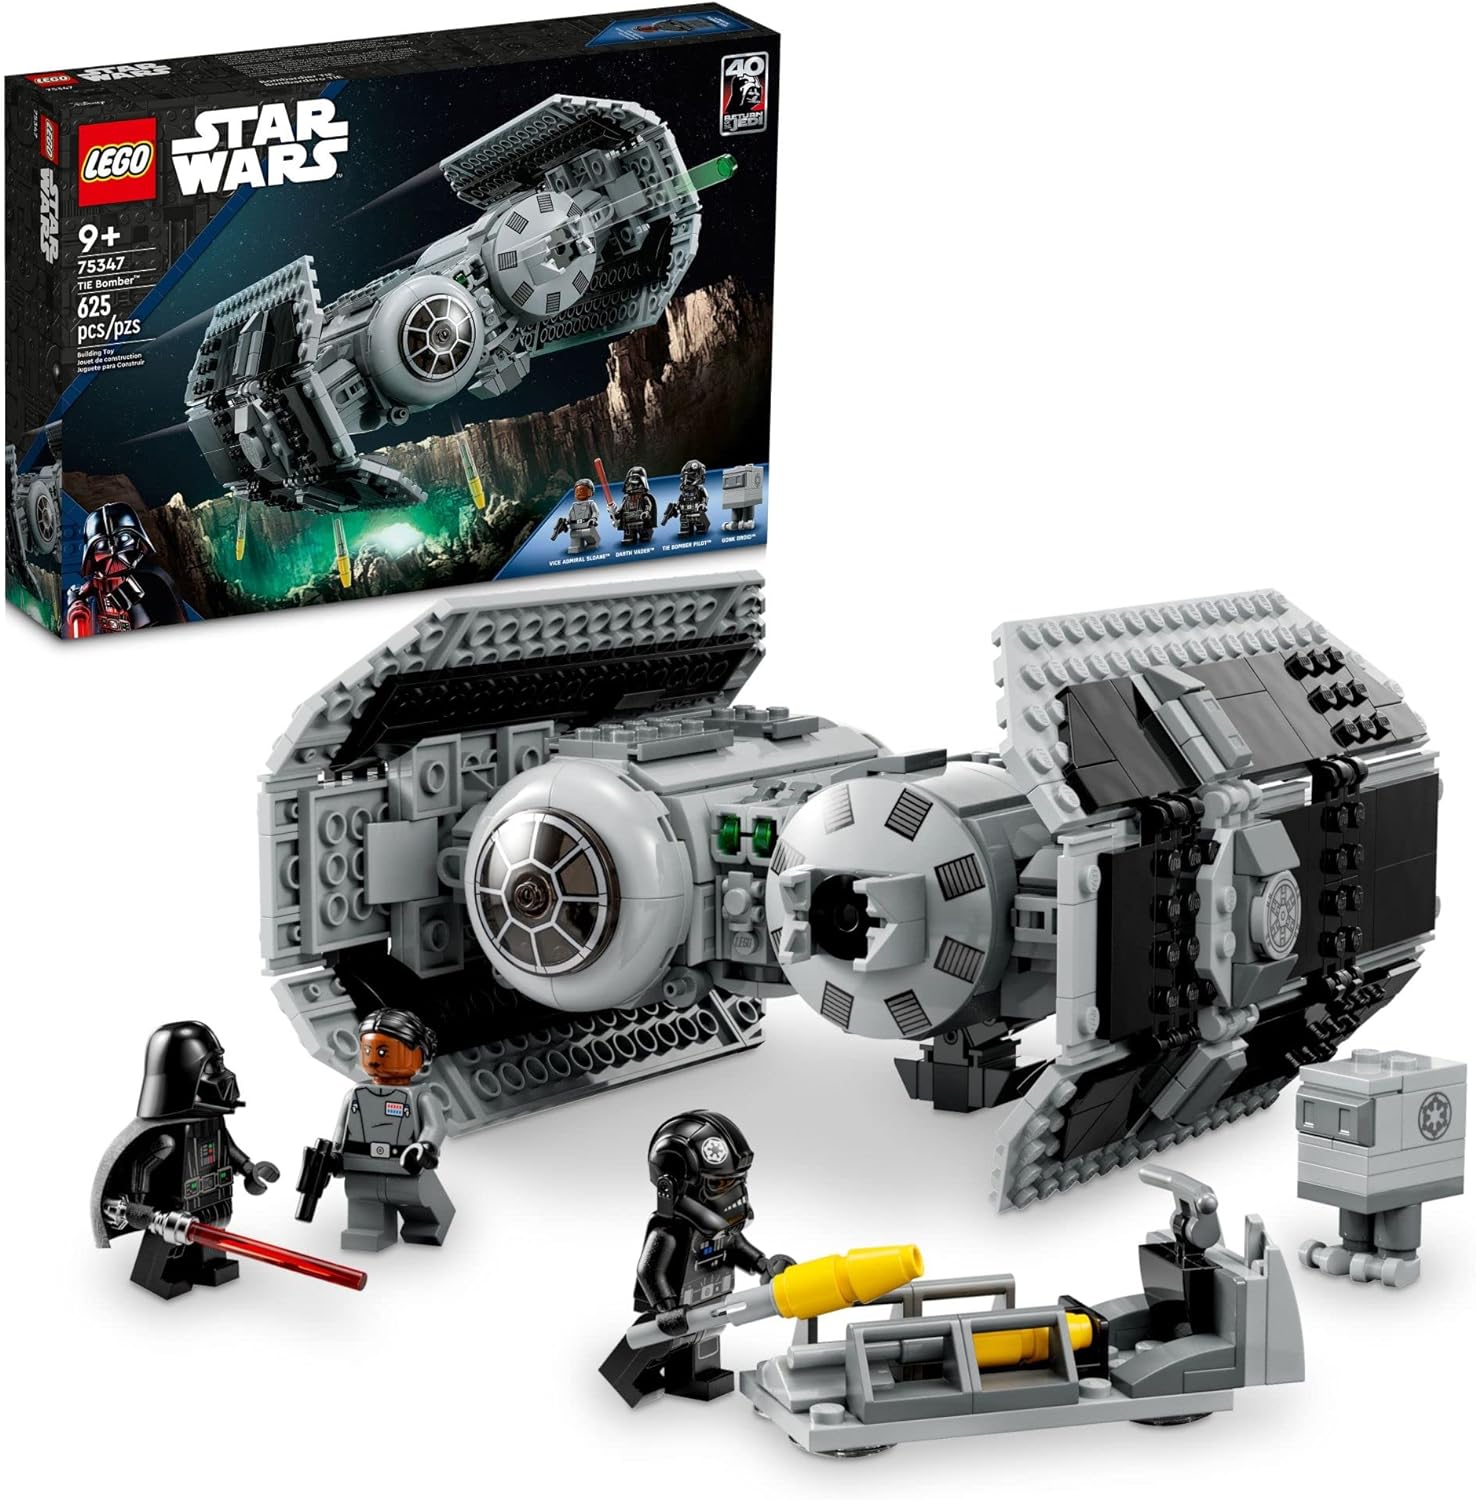 LEGO Star Wars TIE Bomber 75347 Model Building Kit, Star Wars Toy Starfighter with Gonk Droid Figure